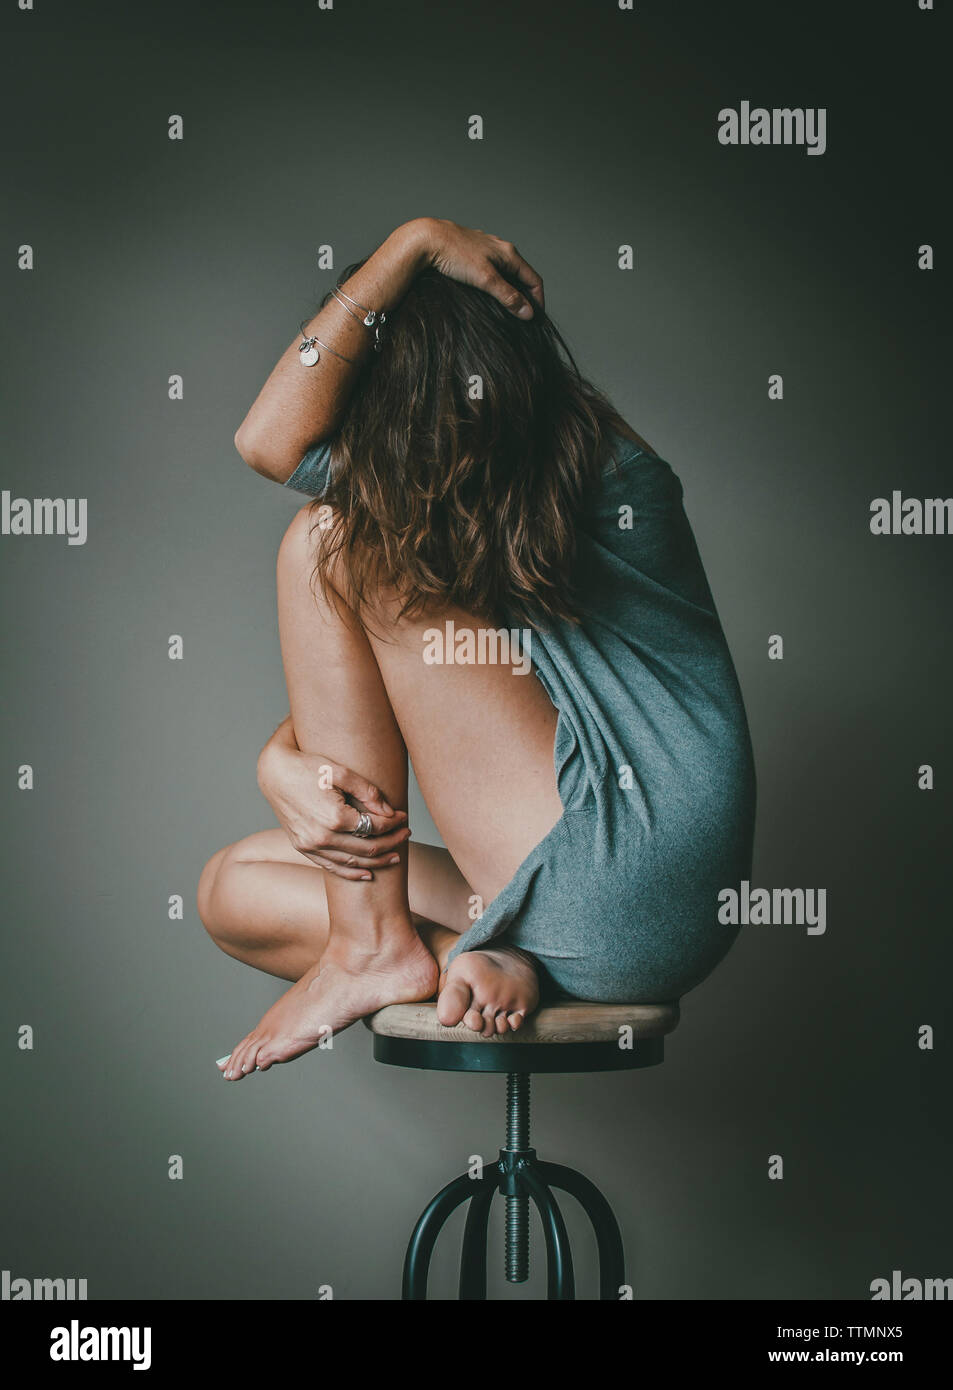 Full length of depressed woman with obscured face sitting on stool against wall Stock Photo